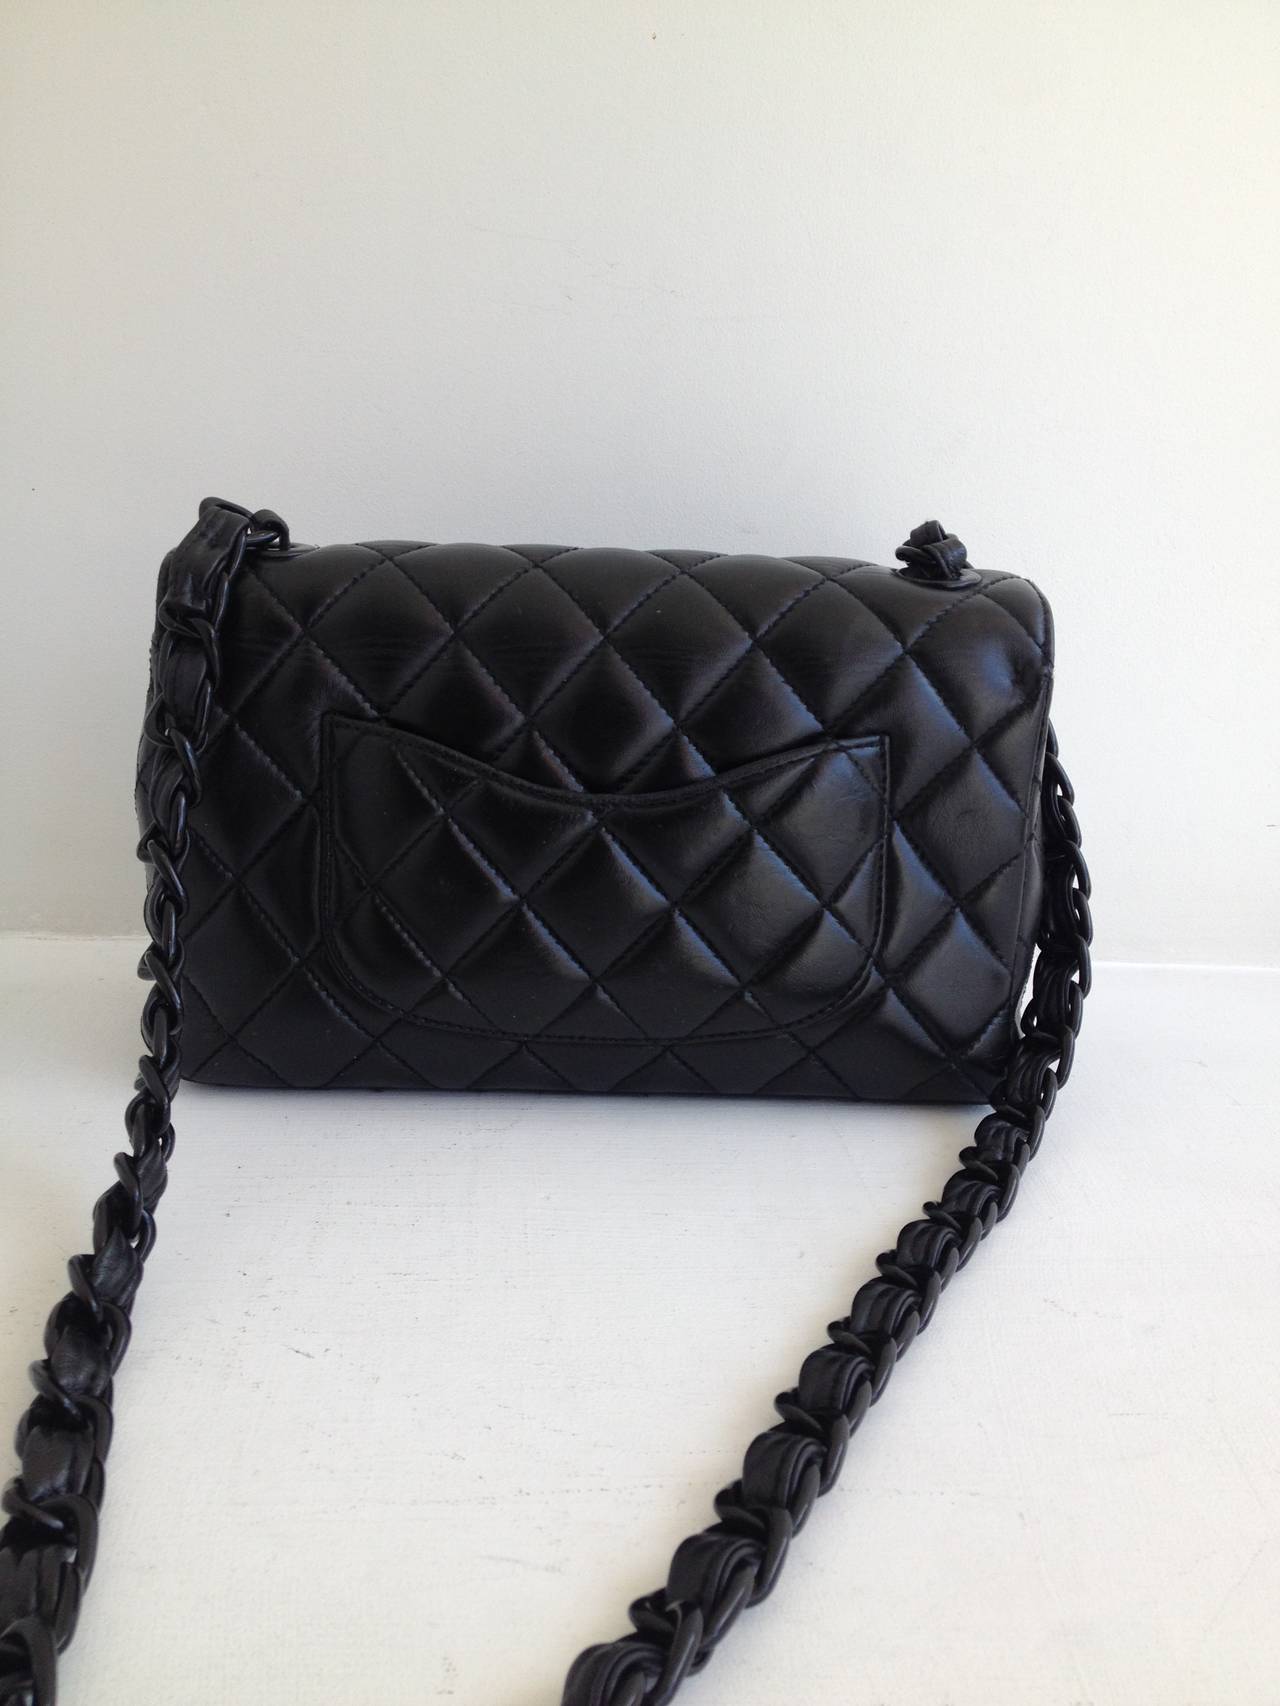 black chanel bag with black chain